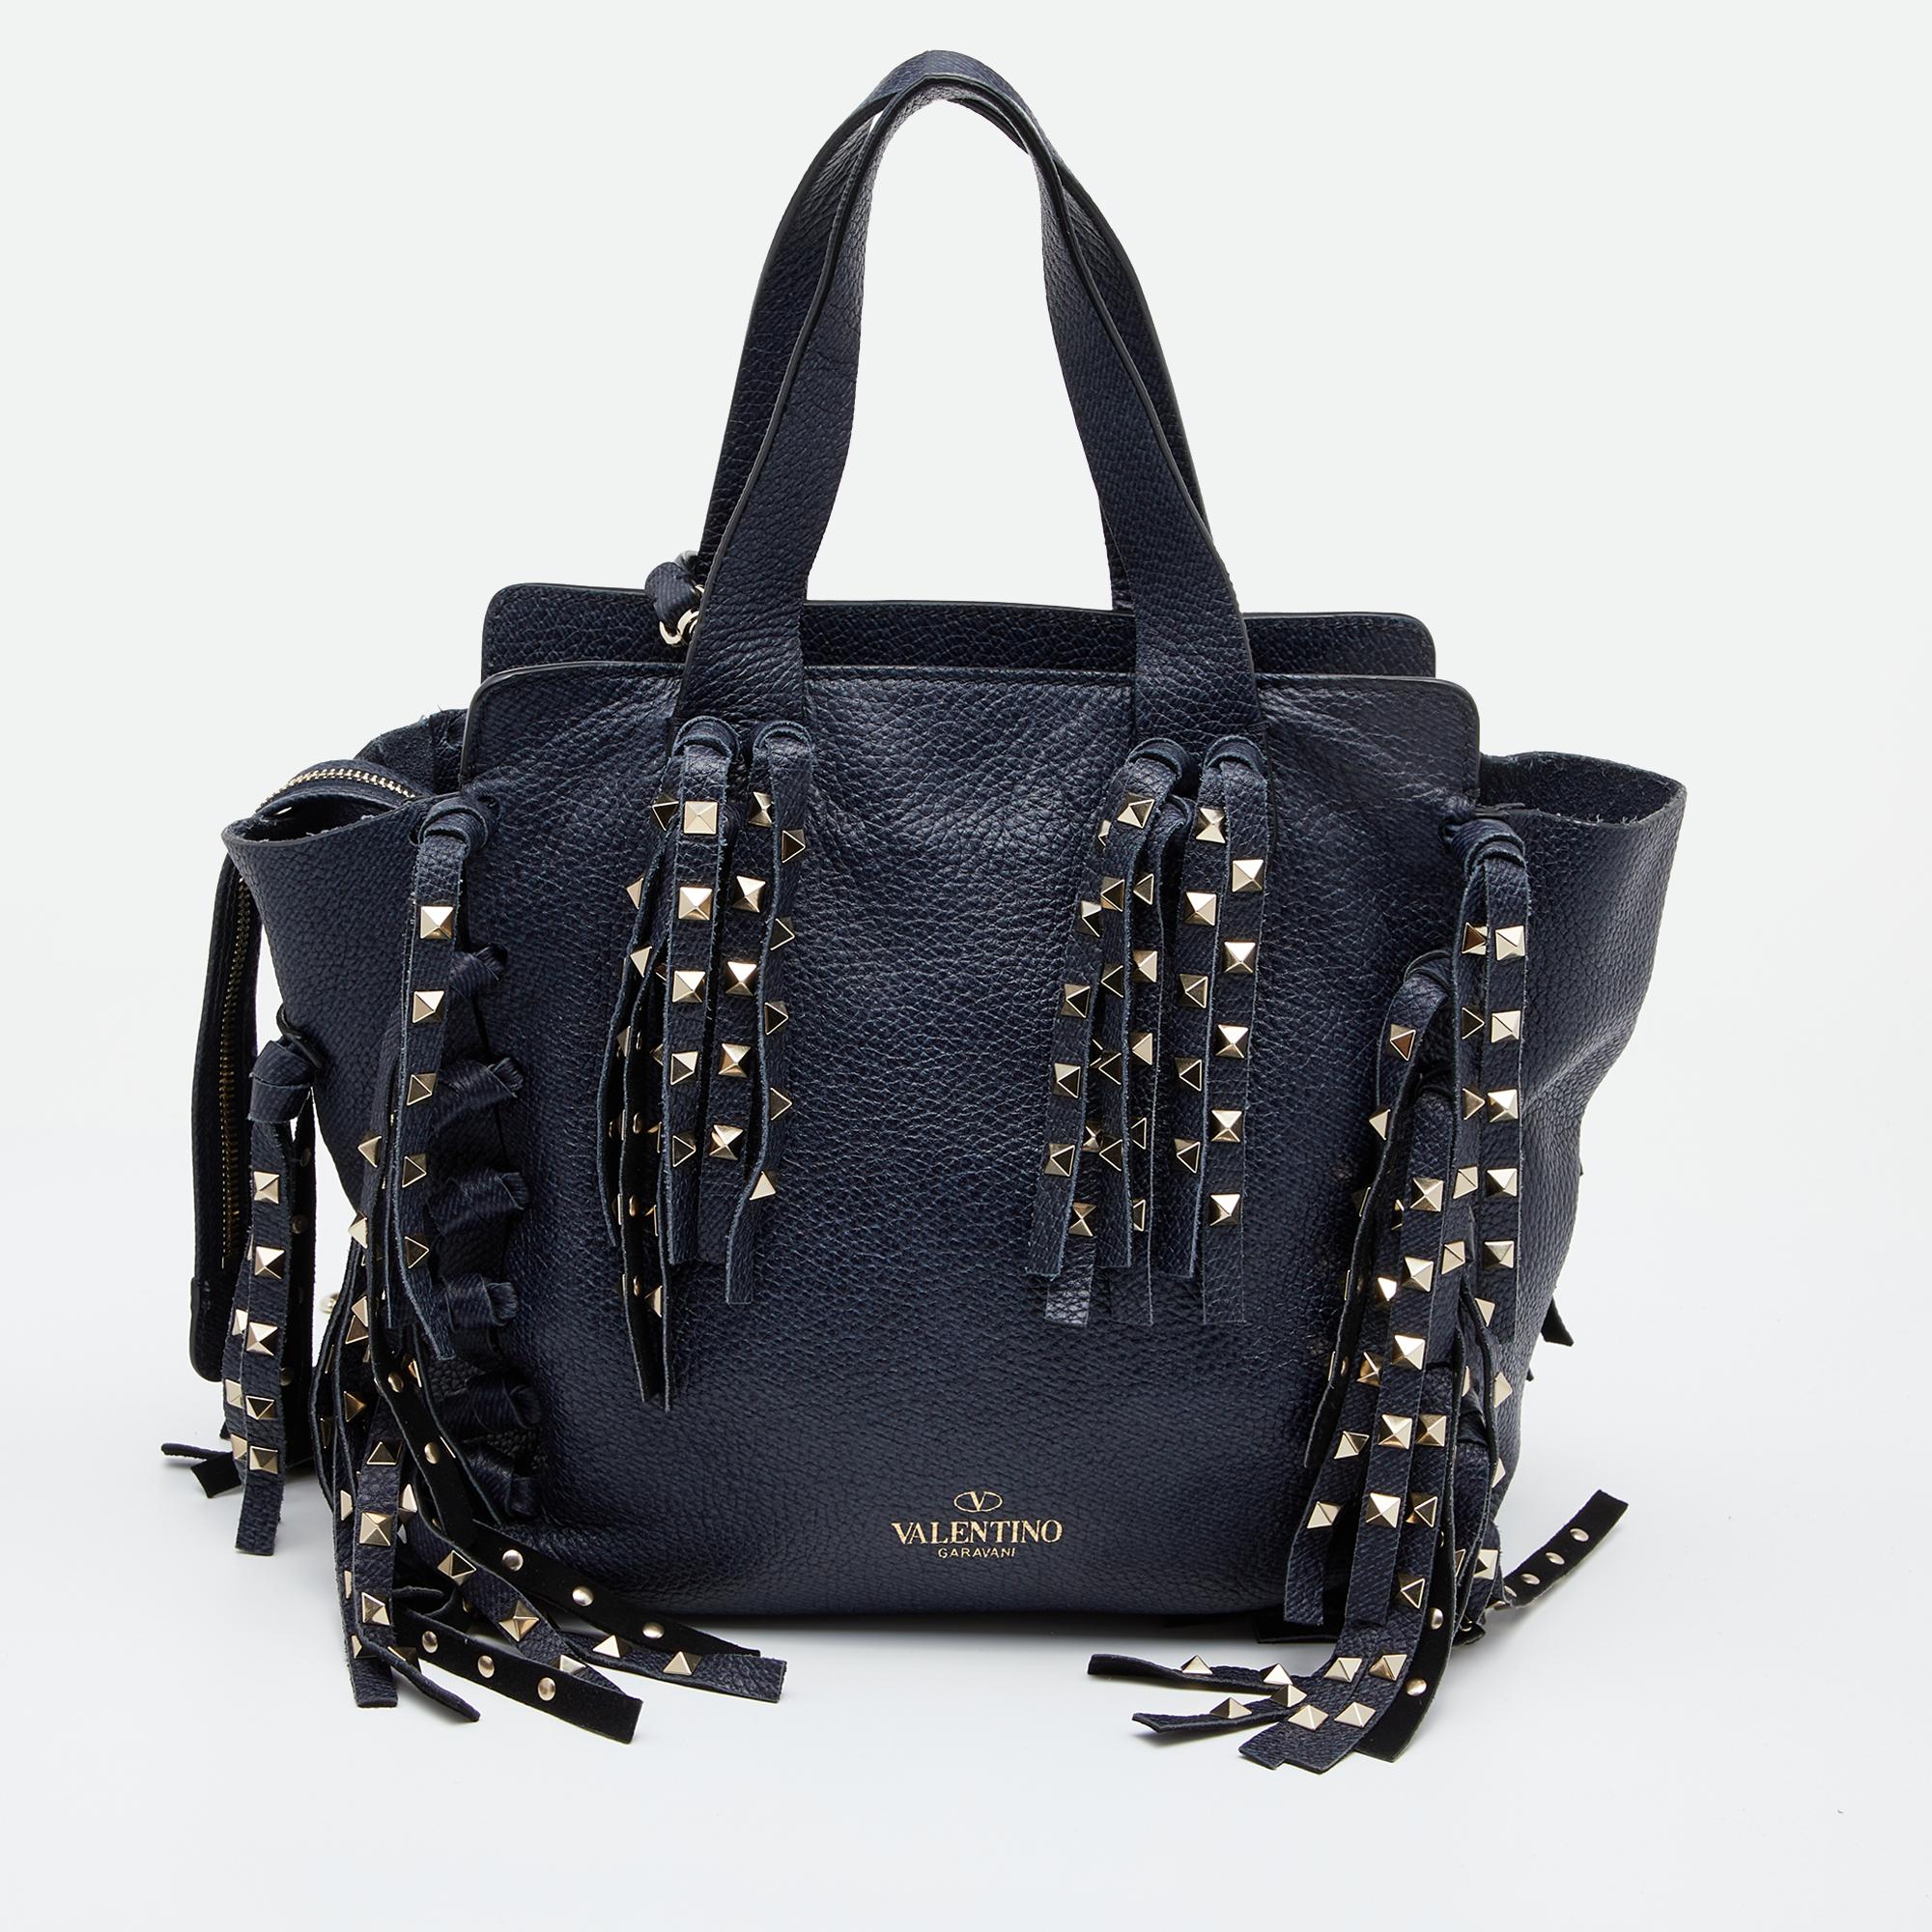 Every modern-day wardrobe needs a Valentino tote like this. Get this beautiful leather bag featuring a lovely touch of fringe details covered with the signature Rockstuds. It is complete with a capacious interior that can easily house your